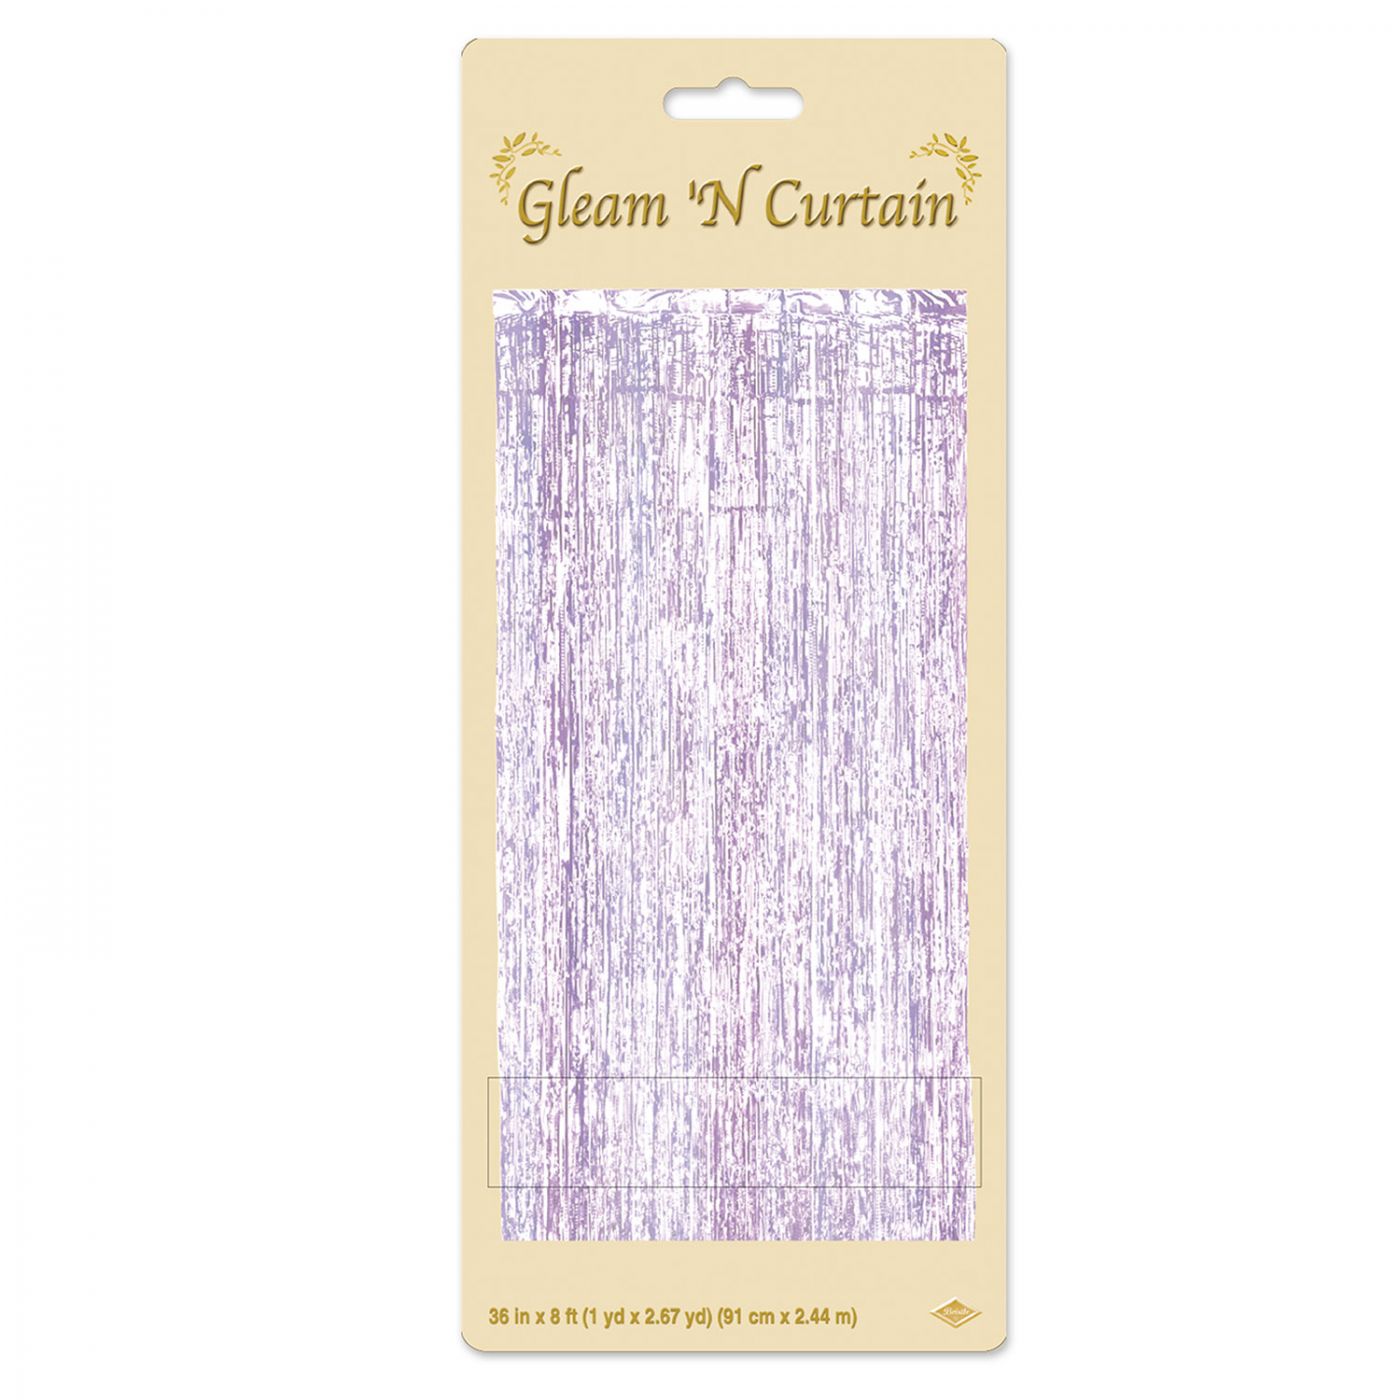 Image of 1-Ply FR Gleam 'N Curtain (6)